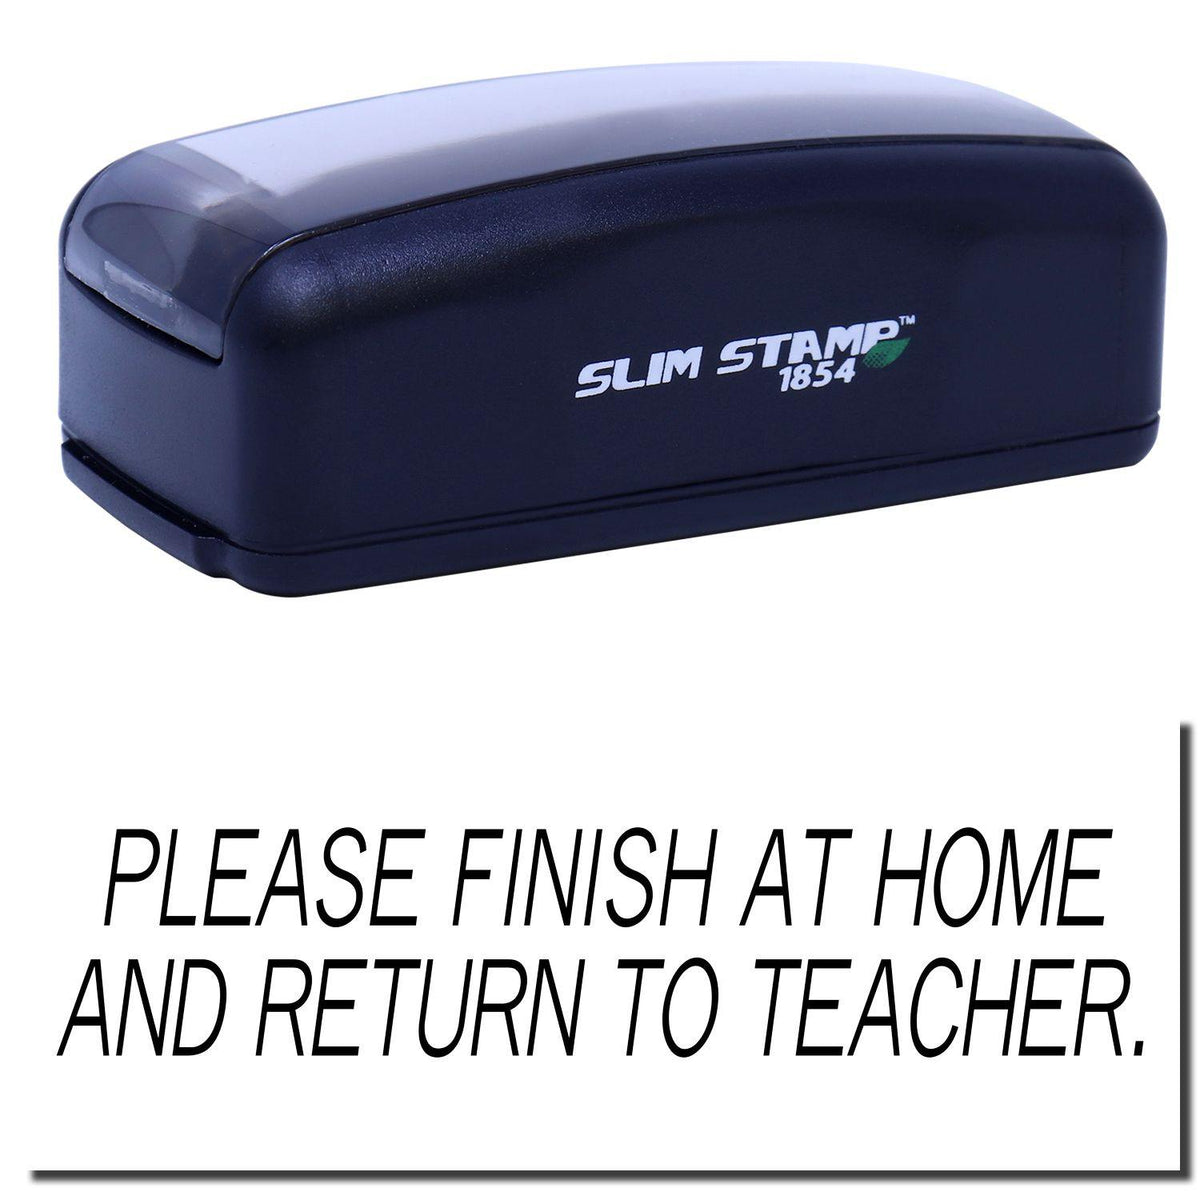 A stock office pre-inked stamp with a stamped image showing how the text &quot;PLEASE FINISH AT HOME AND RETURN TO TEACHER.&quot; in a large font is displayed after stamping.